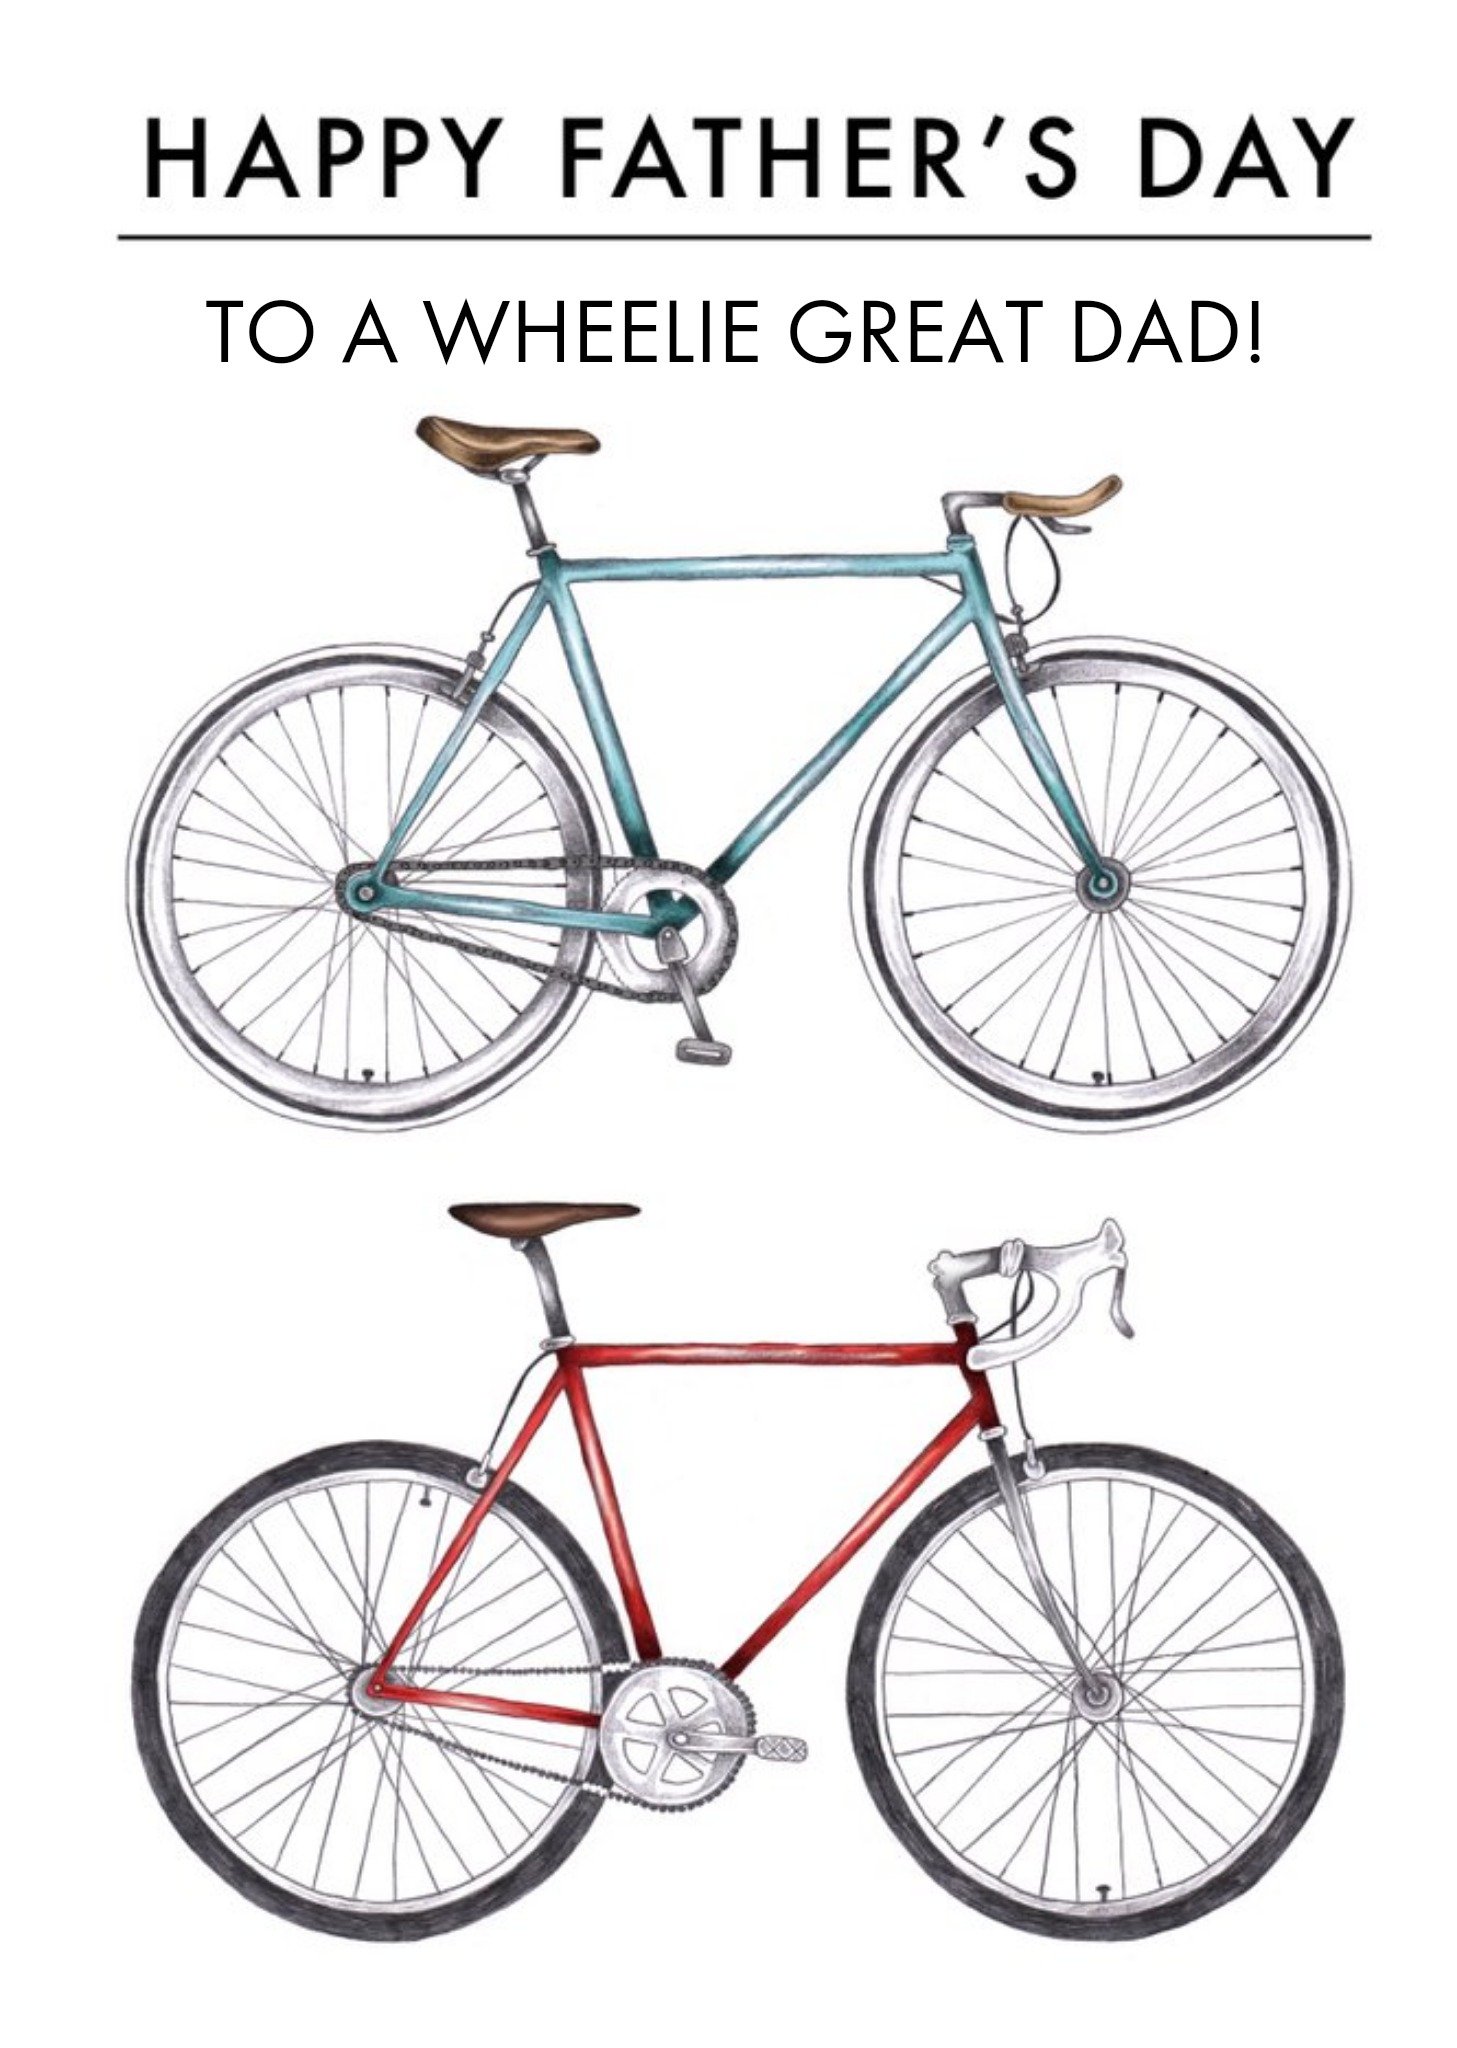 Moonpig Bike Illustration To A Wheelie Great Dad Happy Father's Day Card Ecard